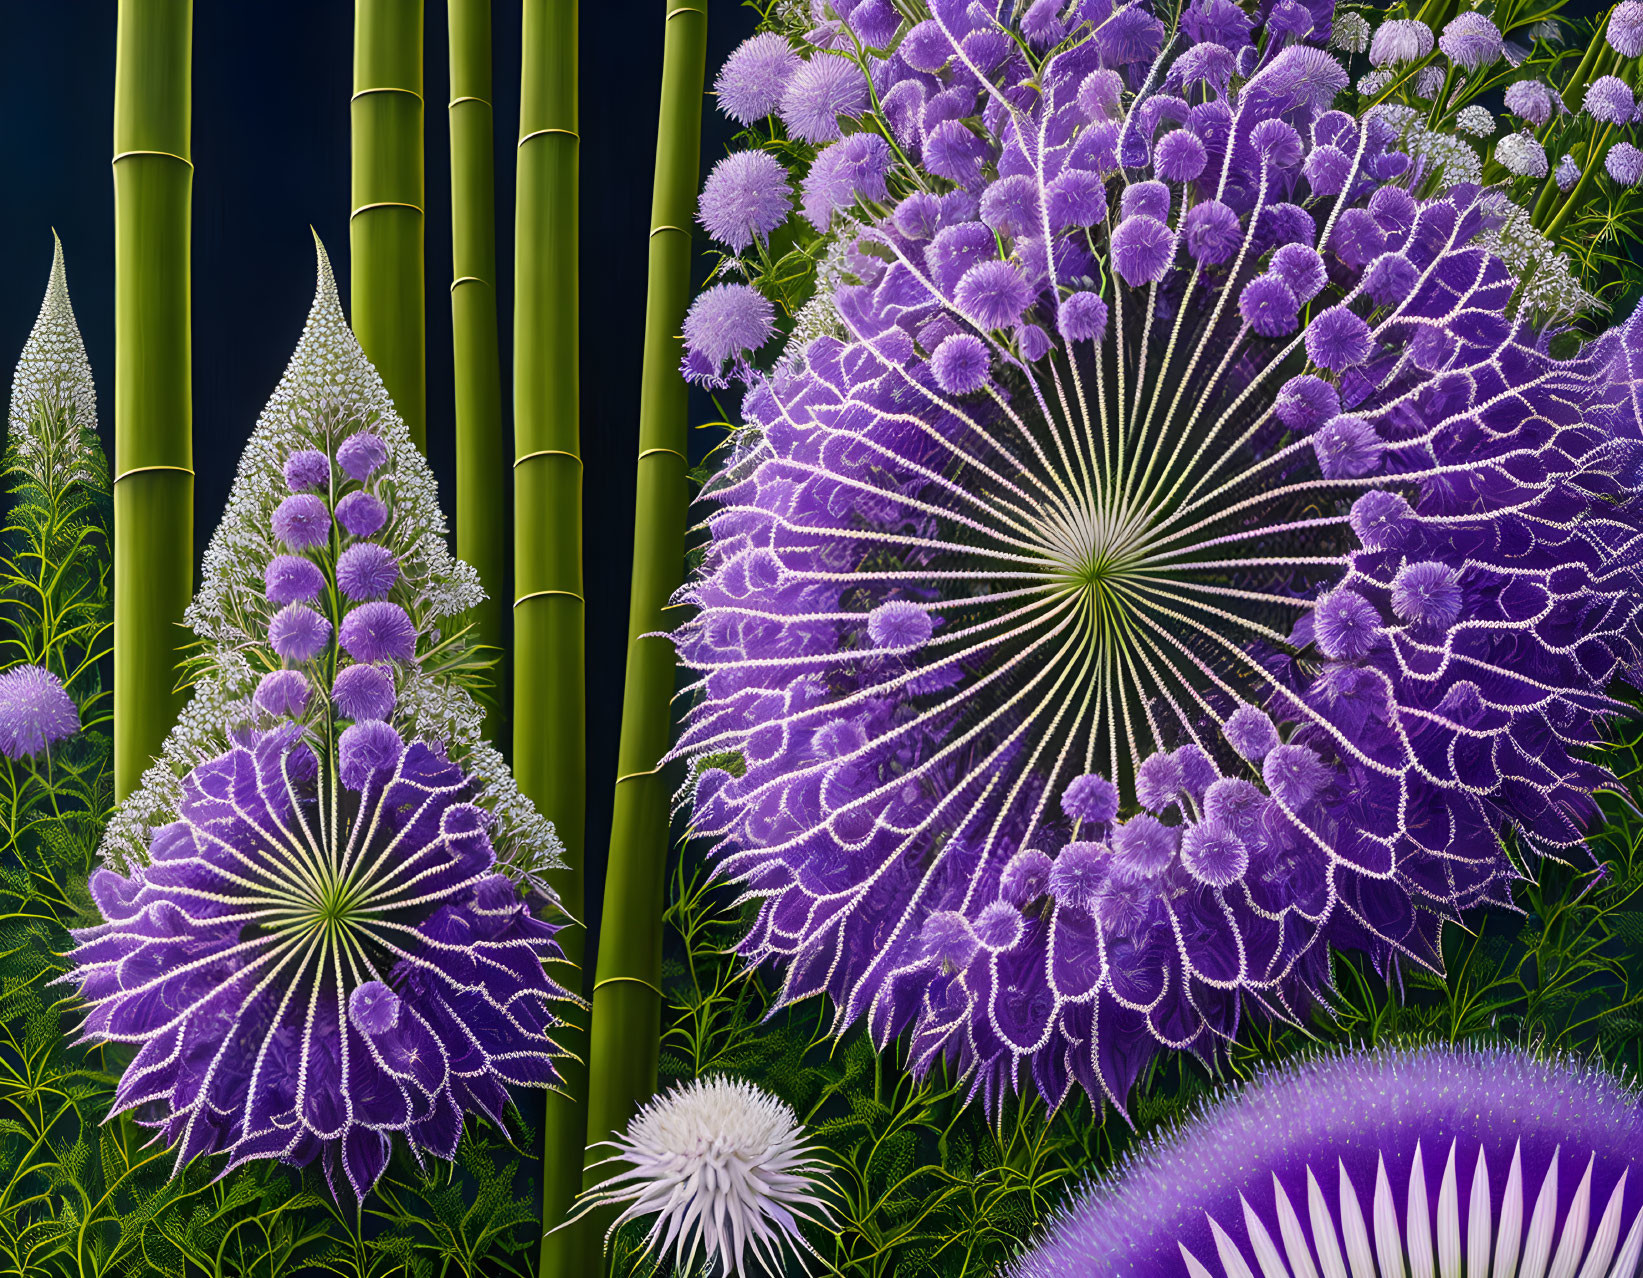 Stylized purple flowers and green bamboo in digital artwork